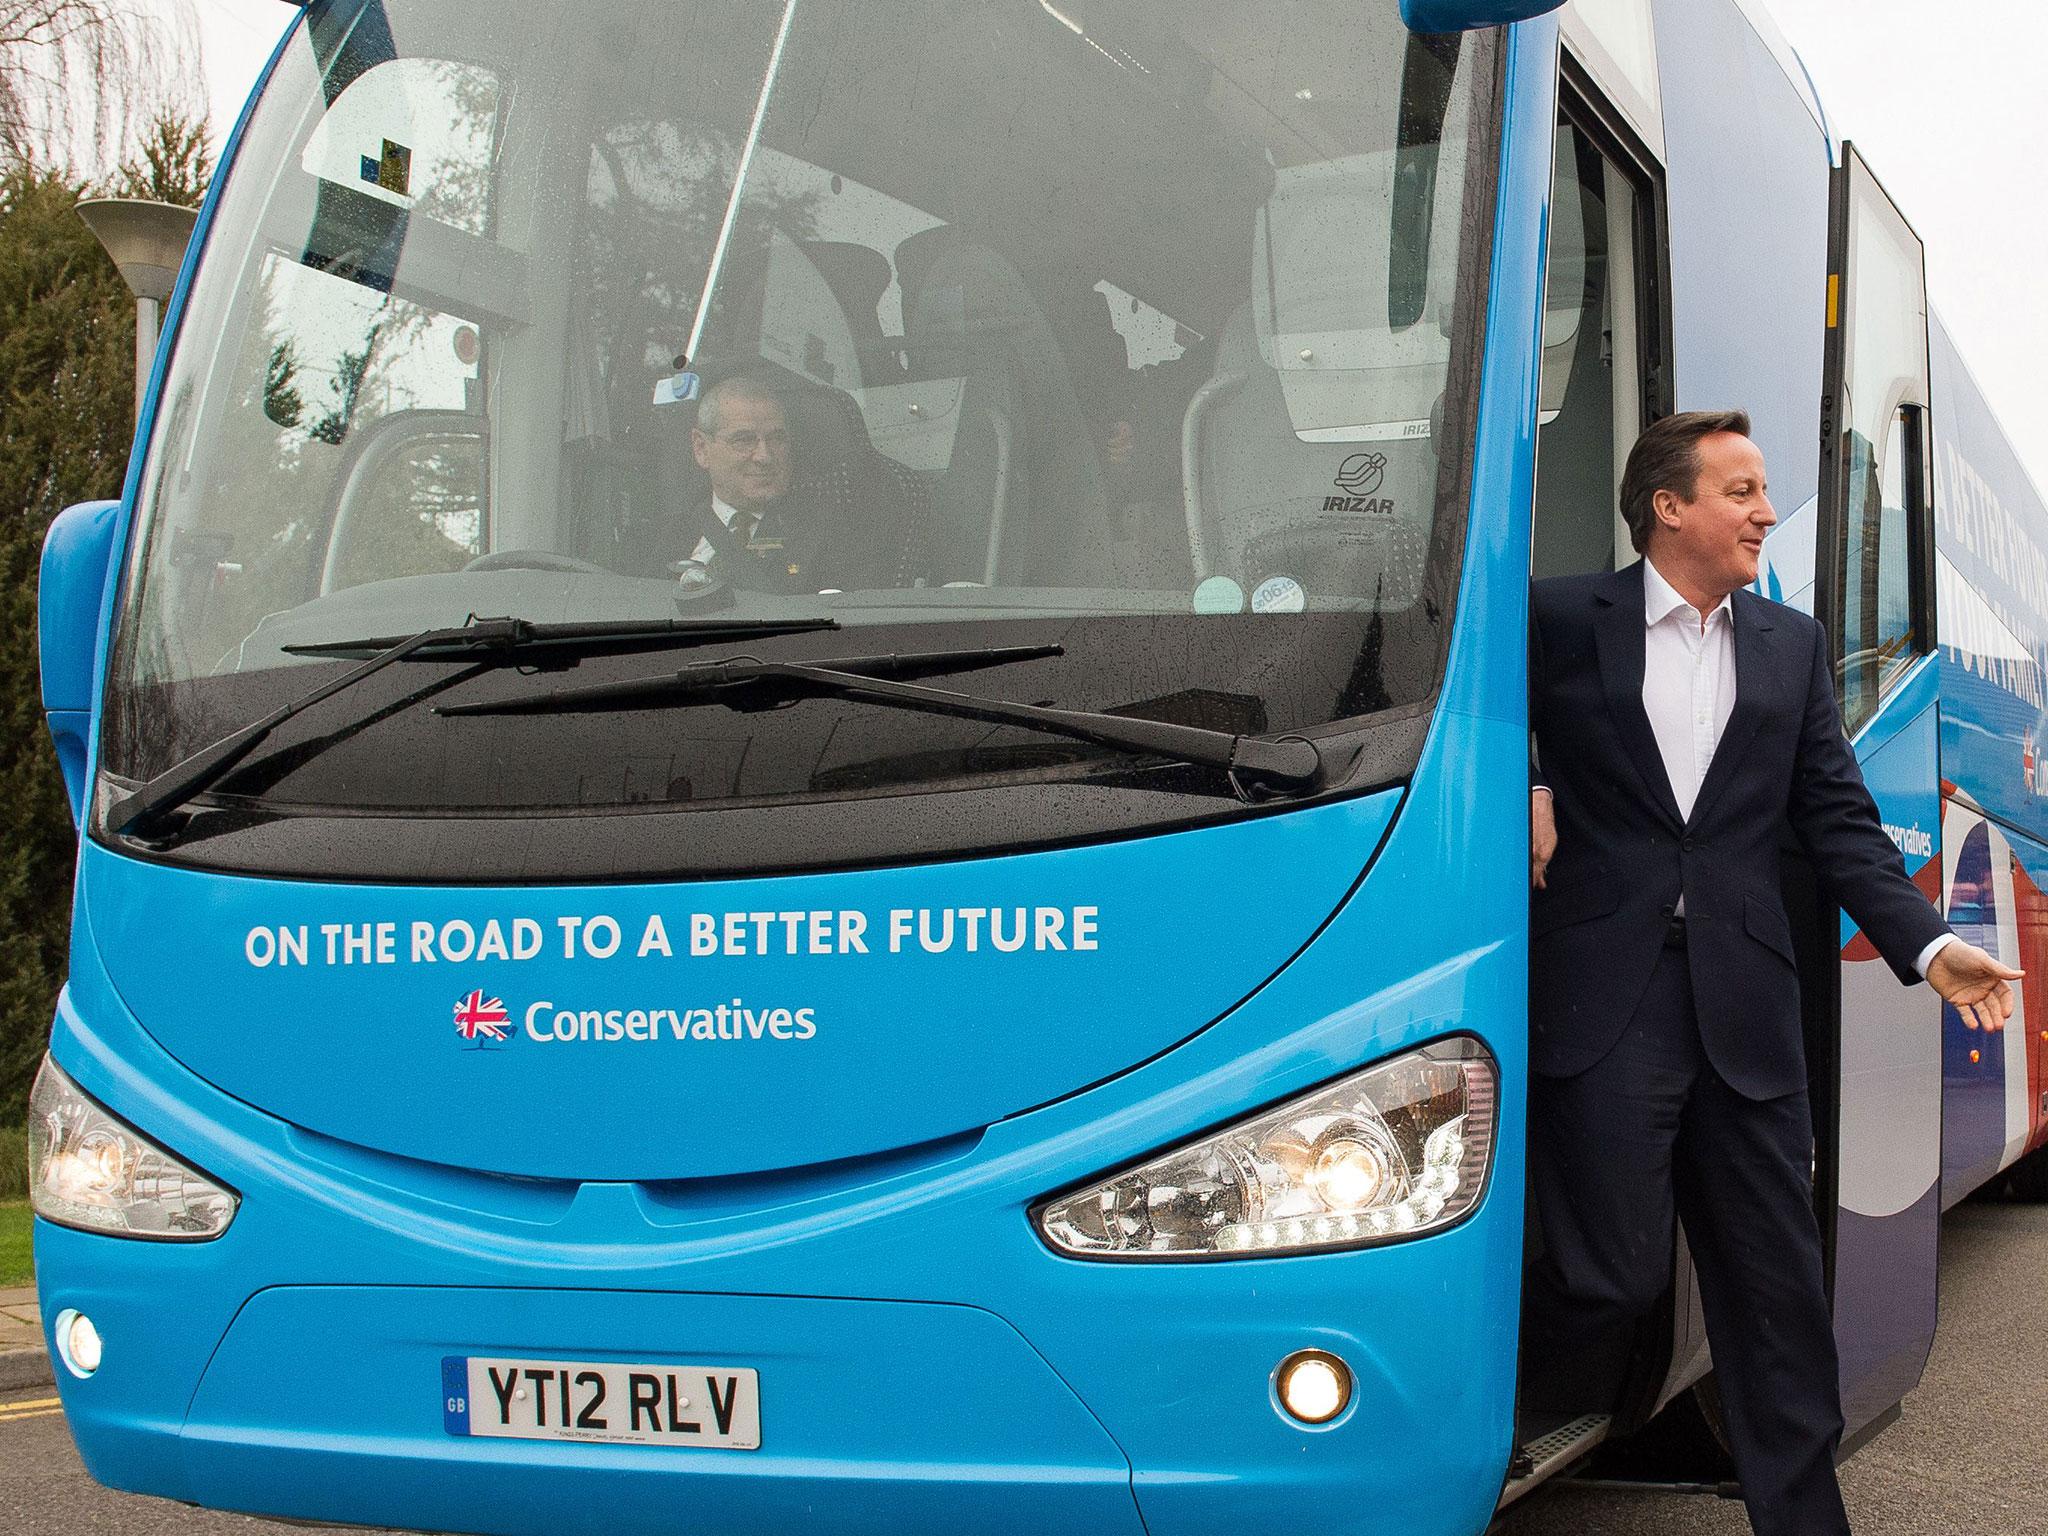 David Cameron campaigning with the blue Tory battlebus